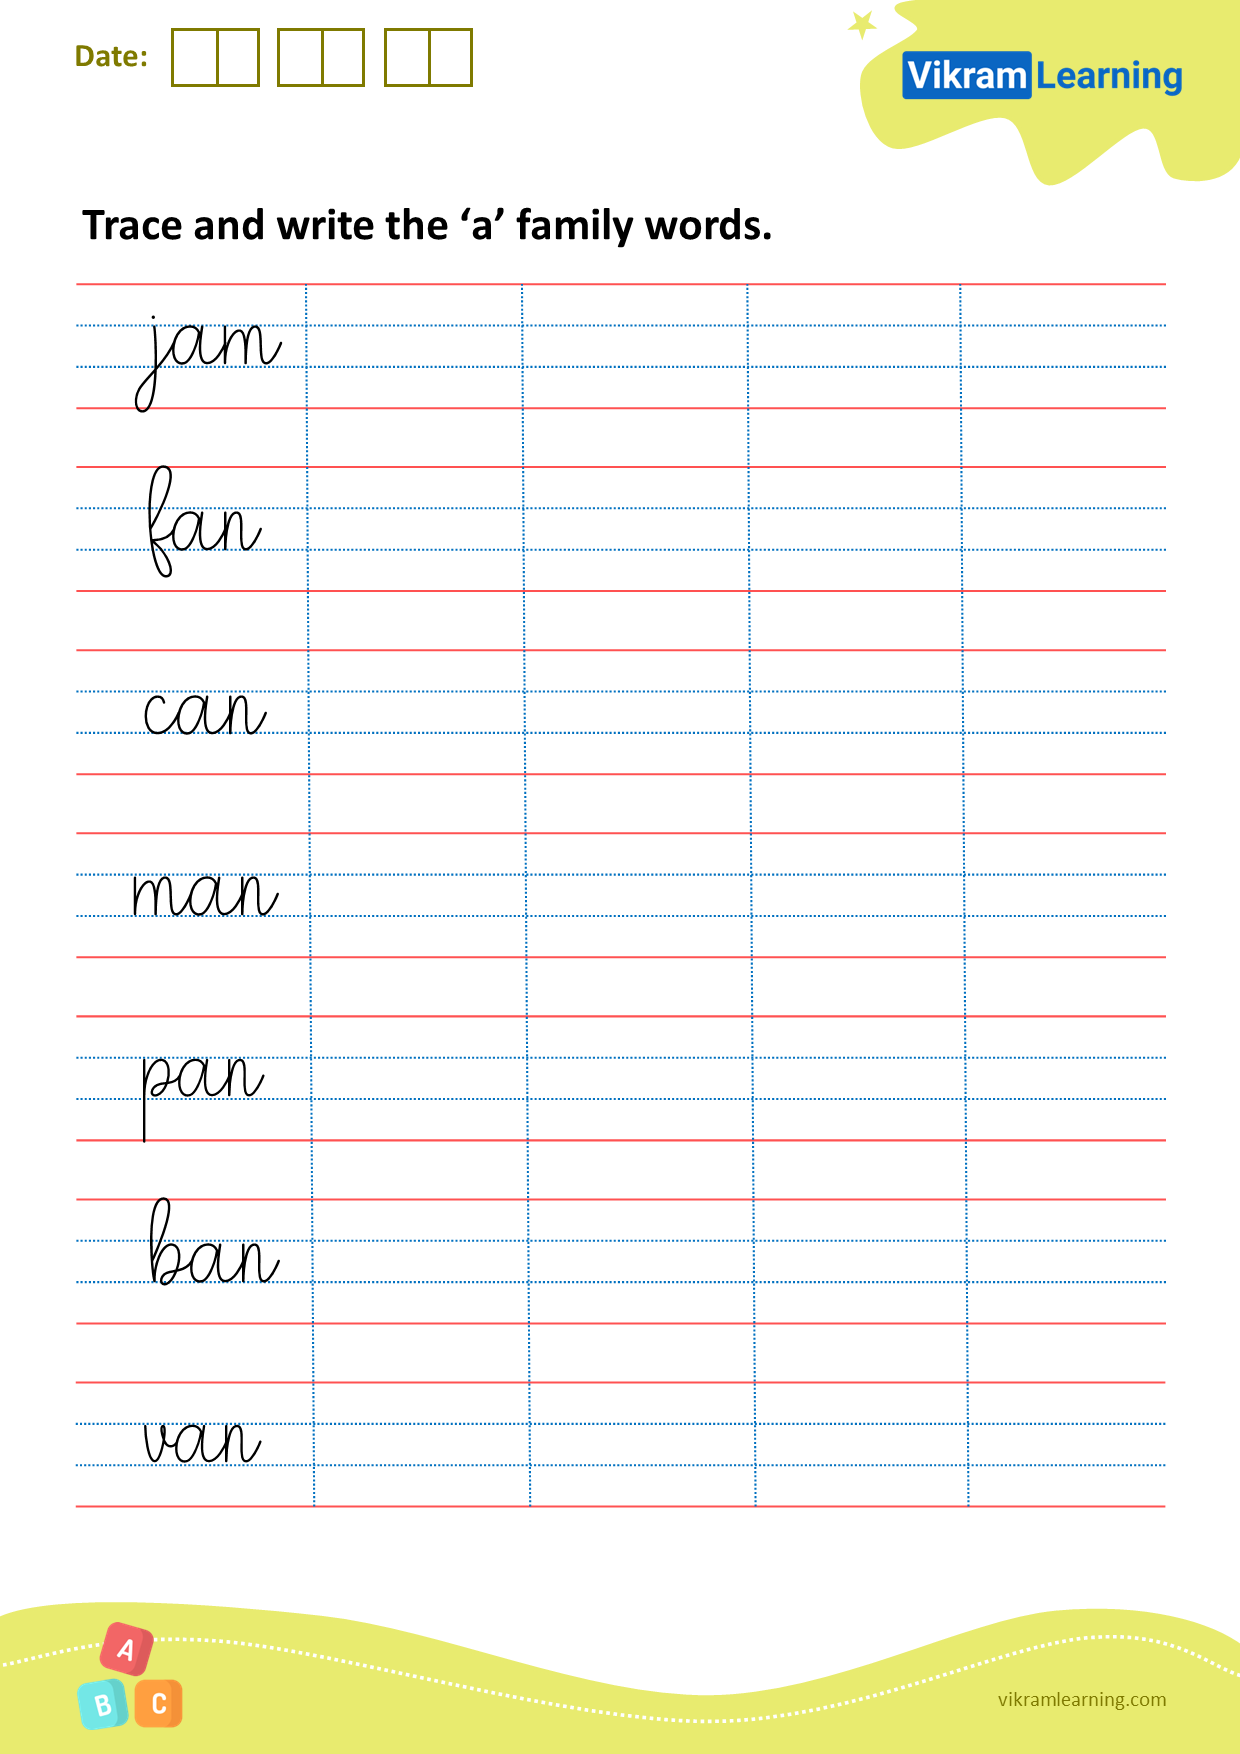 Download trace and write the ‘a’ family words worksheets